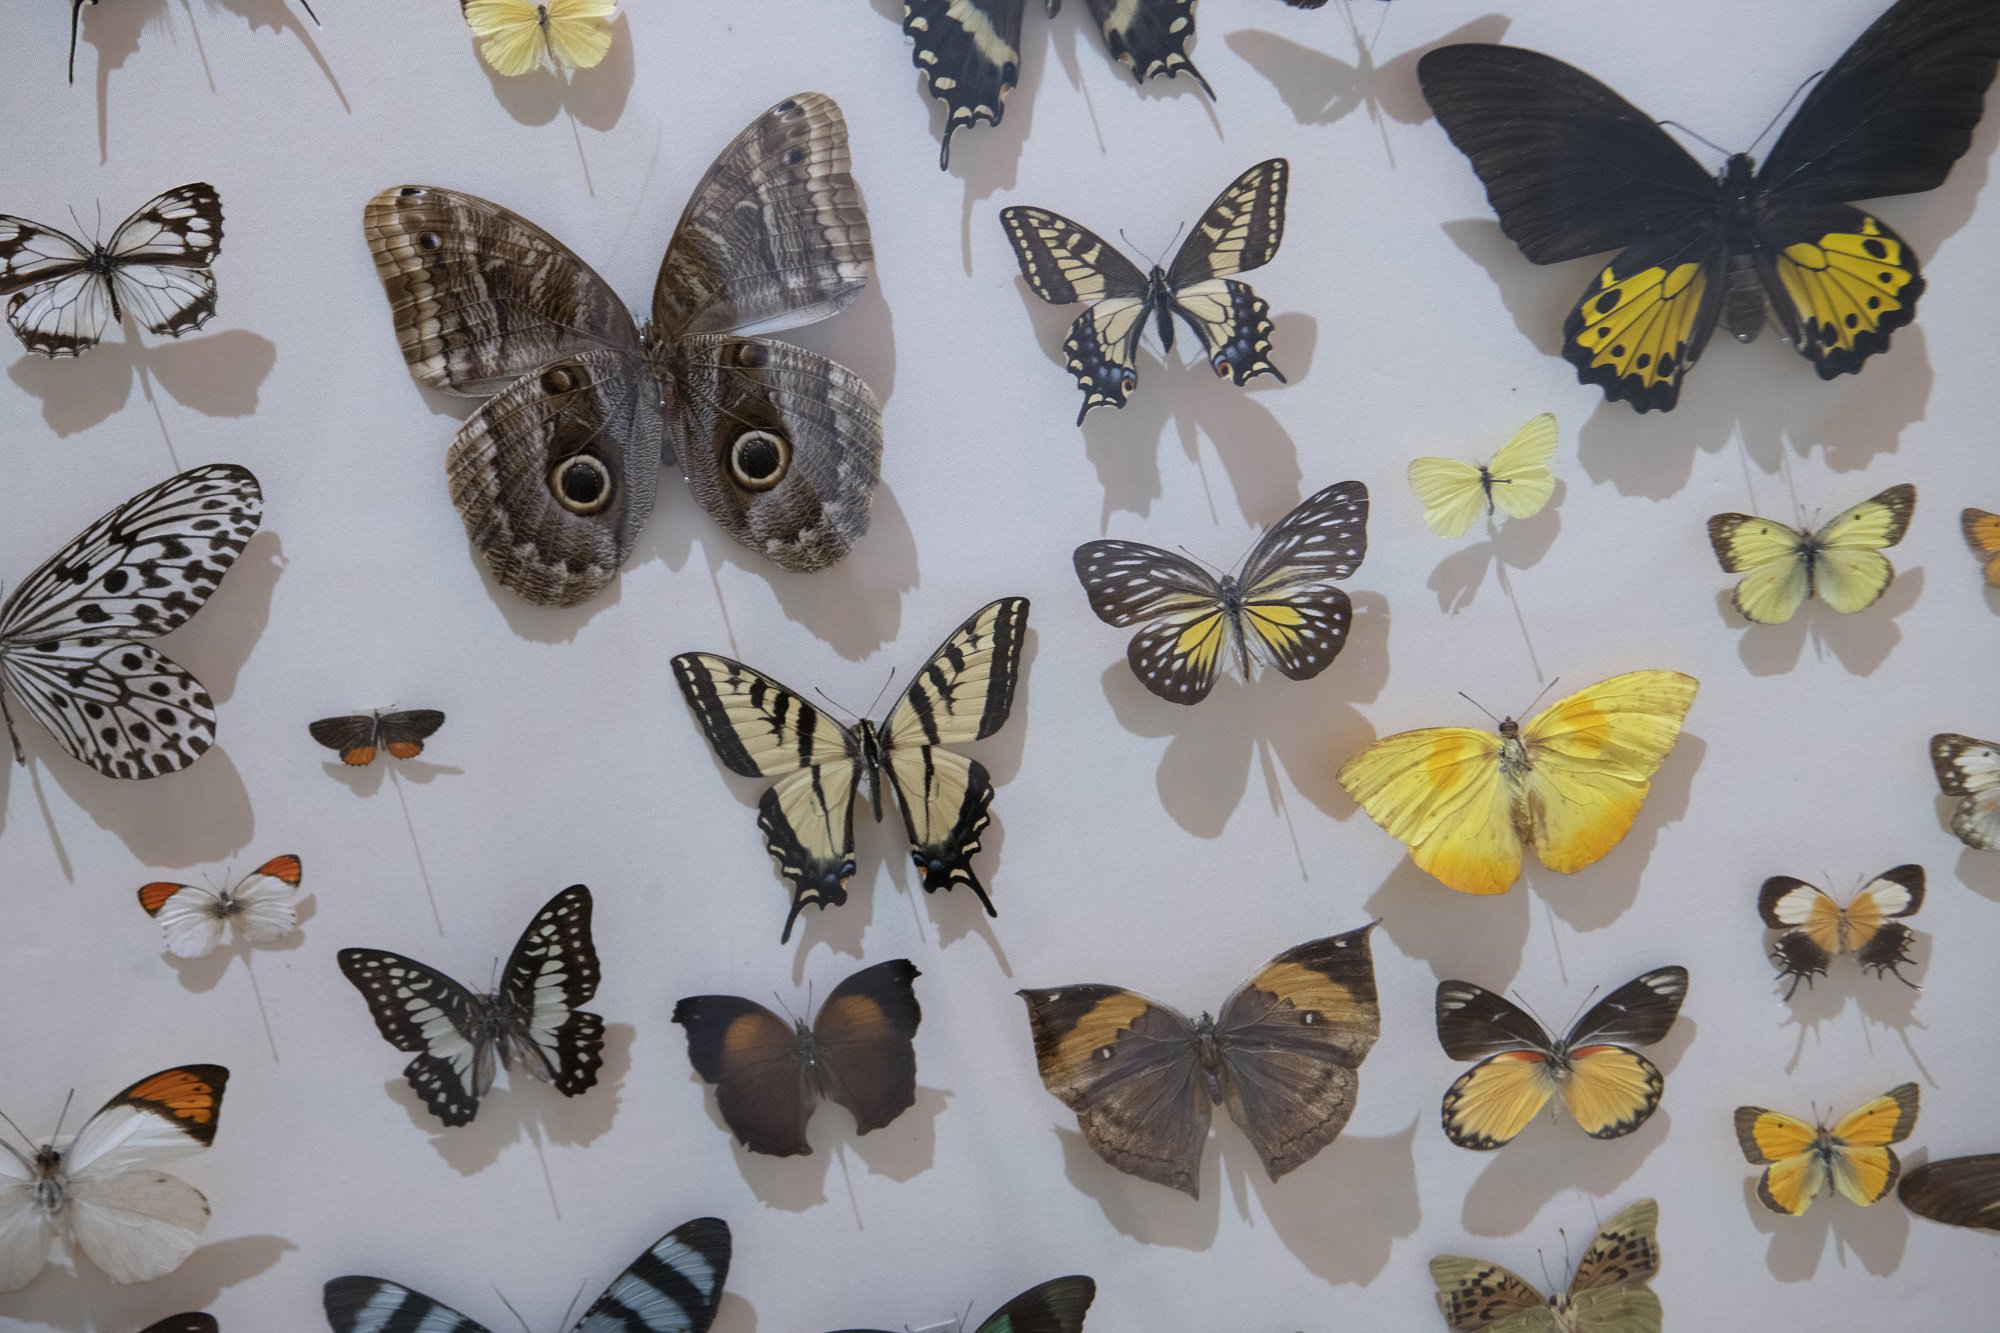 Butterfly specimens in a museum.